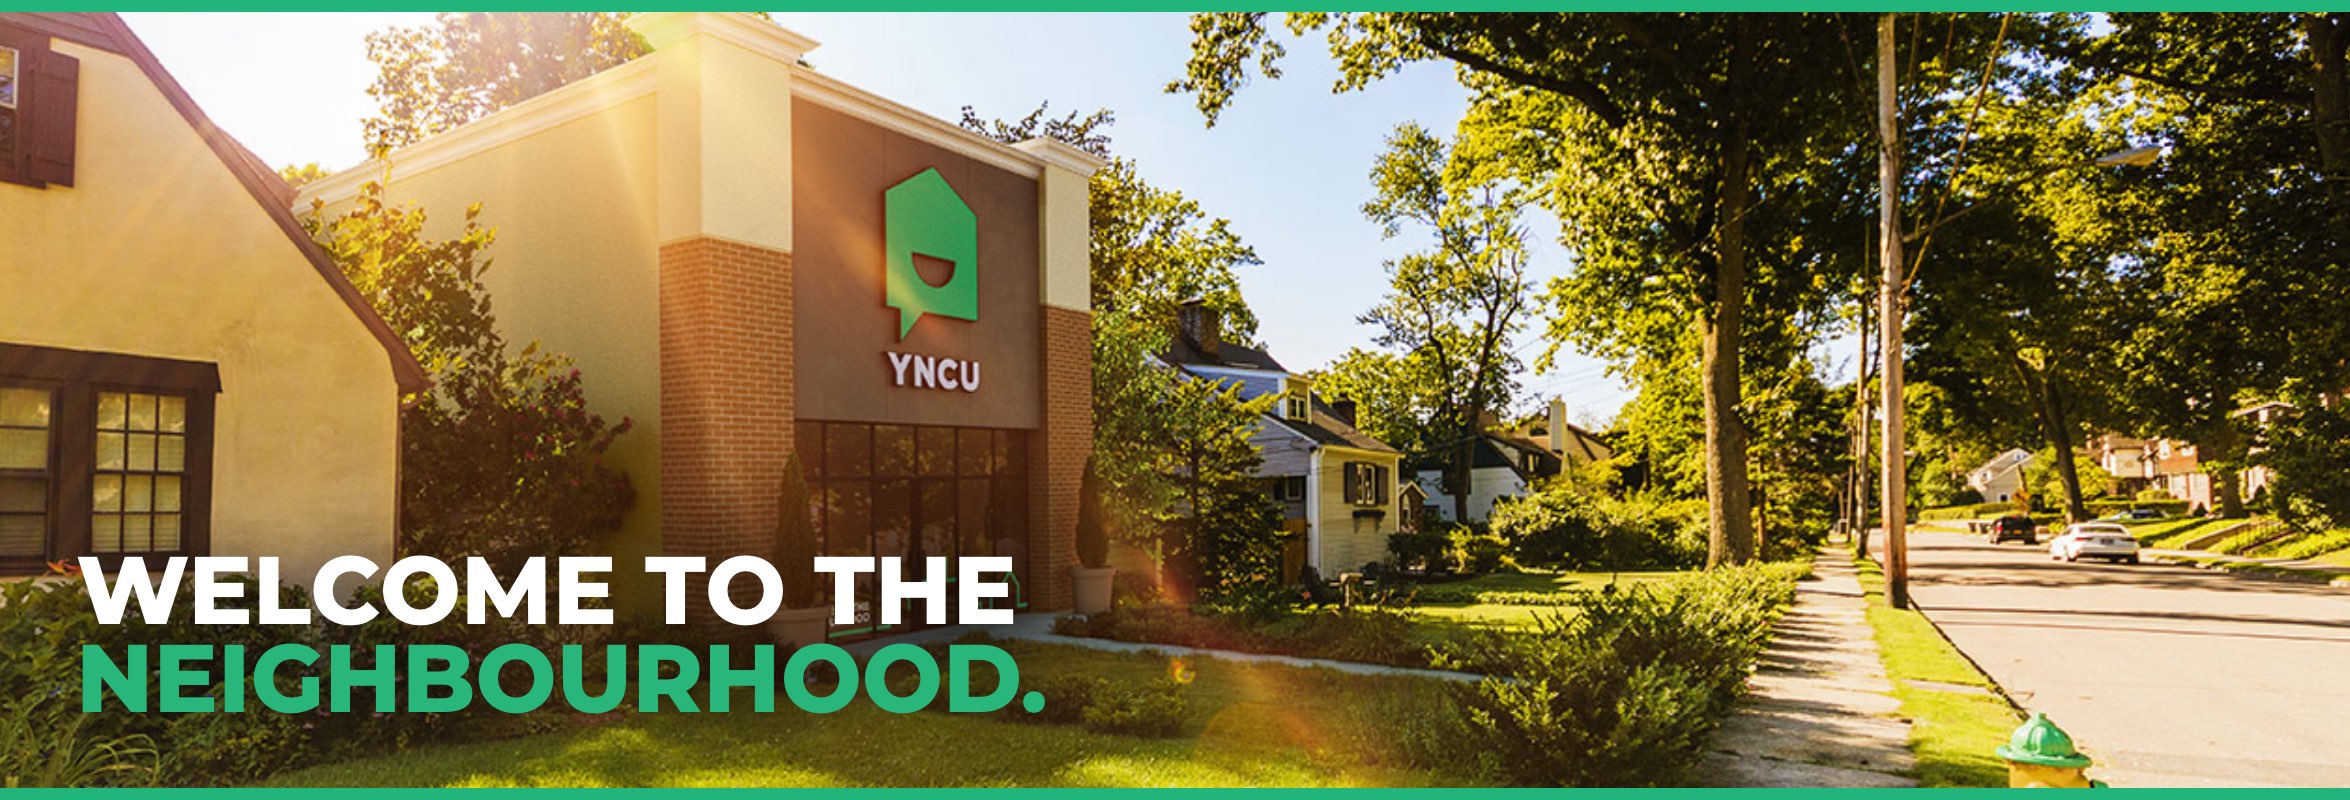 A YNCU branch sitting between two residential homes. Text reads "Welcome to the Neighbourhood."